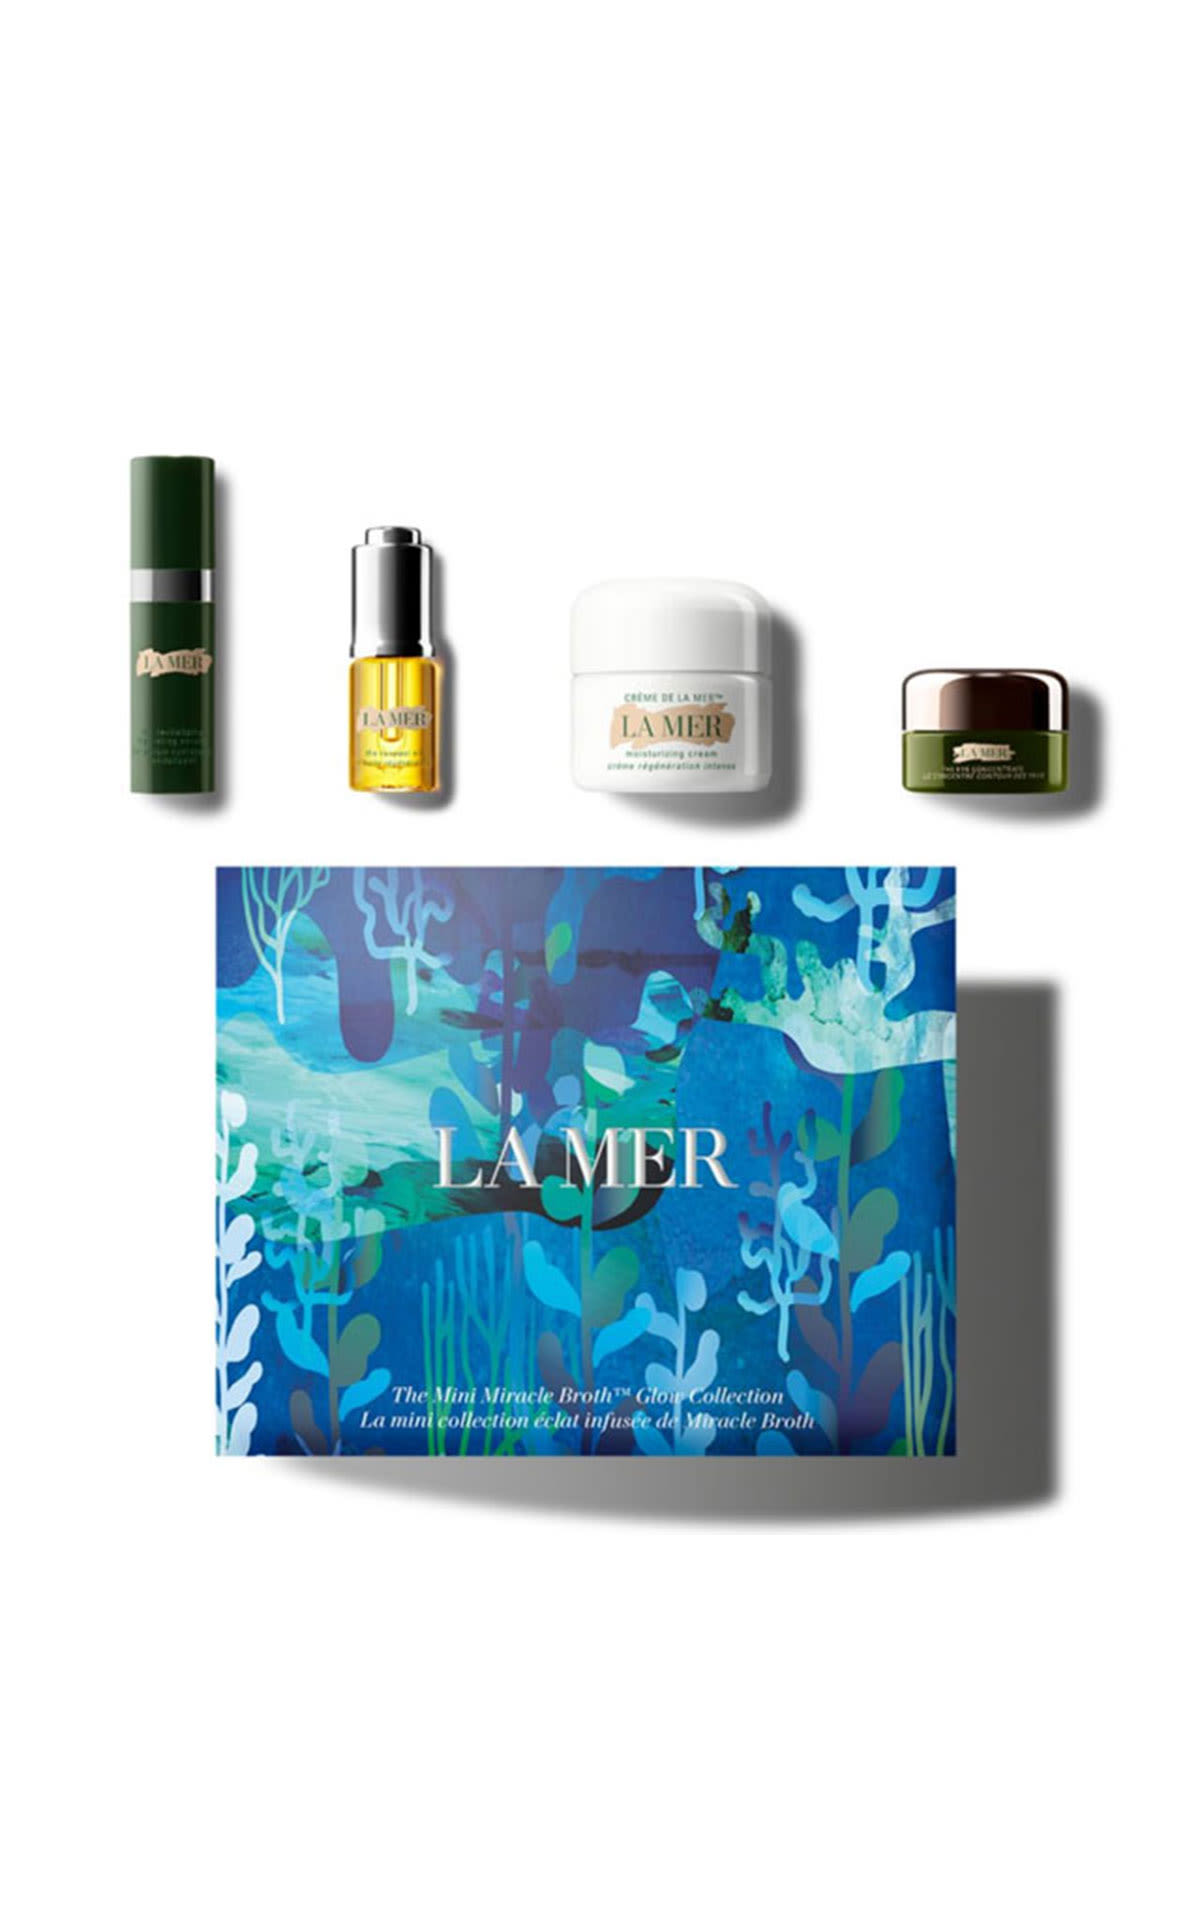 The Cosmetics Company Store La Mer The mini miracle broth glow collection from Bicester Village